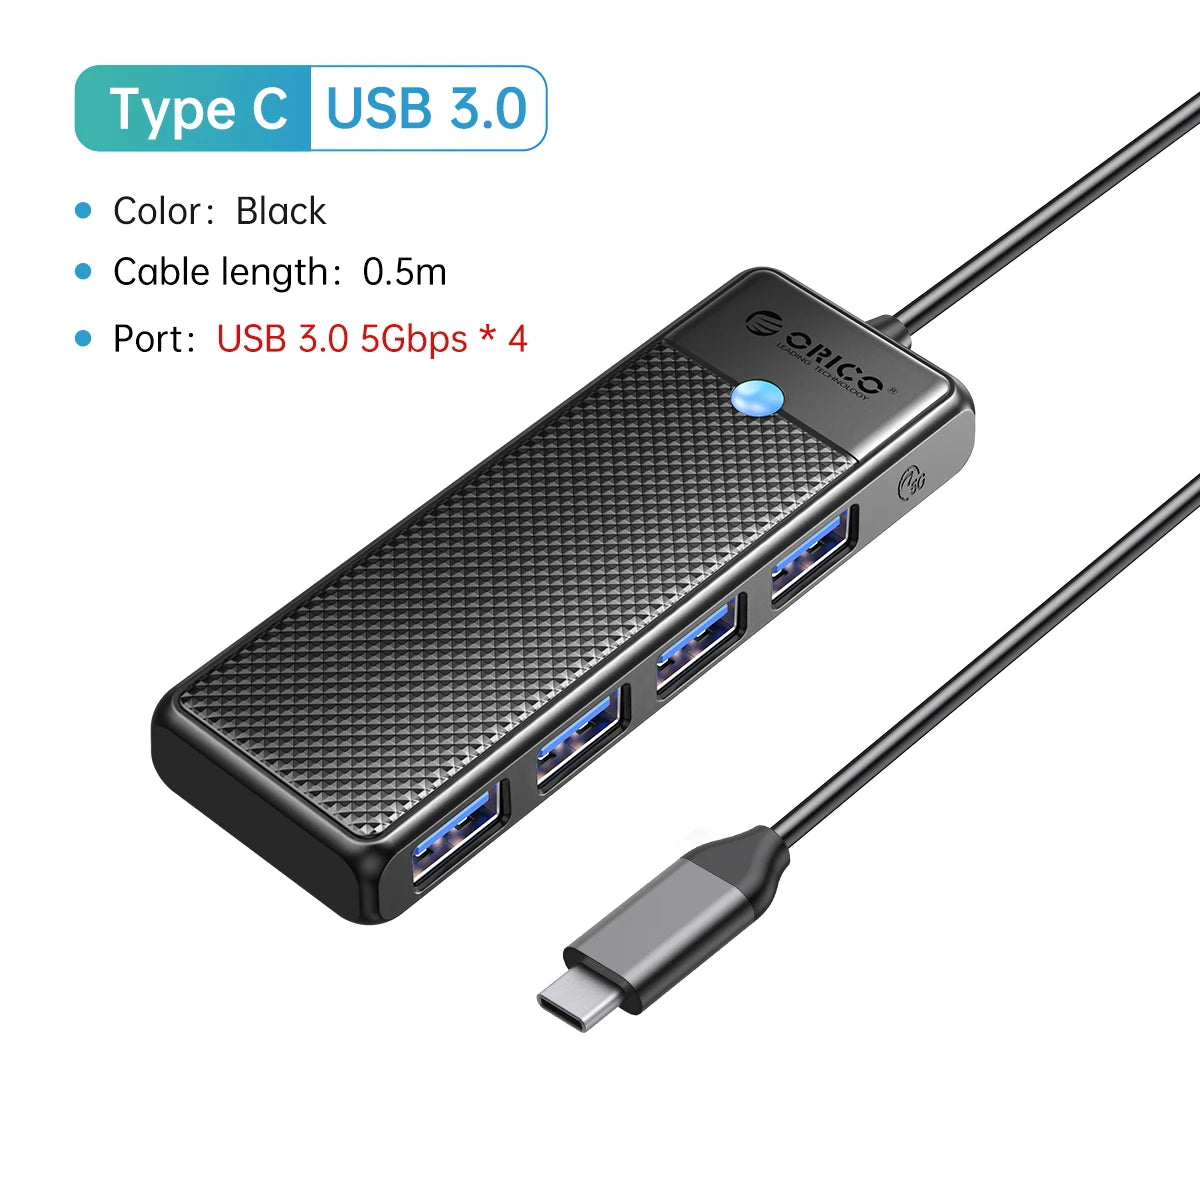 Cloud Discoveries Ultra-Slim Type C USB Hub 3.0 - 4-Port Splitter OTG Adapter for PC Computer Accessories, Enhance Connectivity with Compact Design, Plug and Play Convenience for Keyboards, Mice, and More